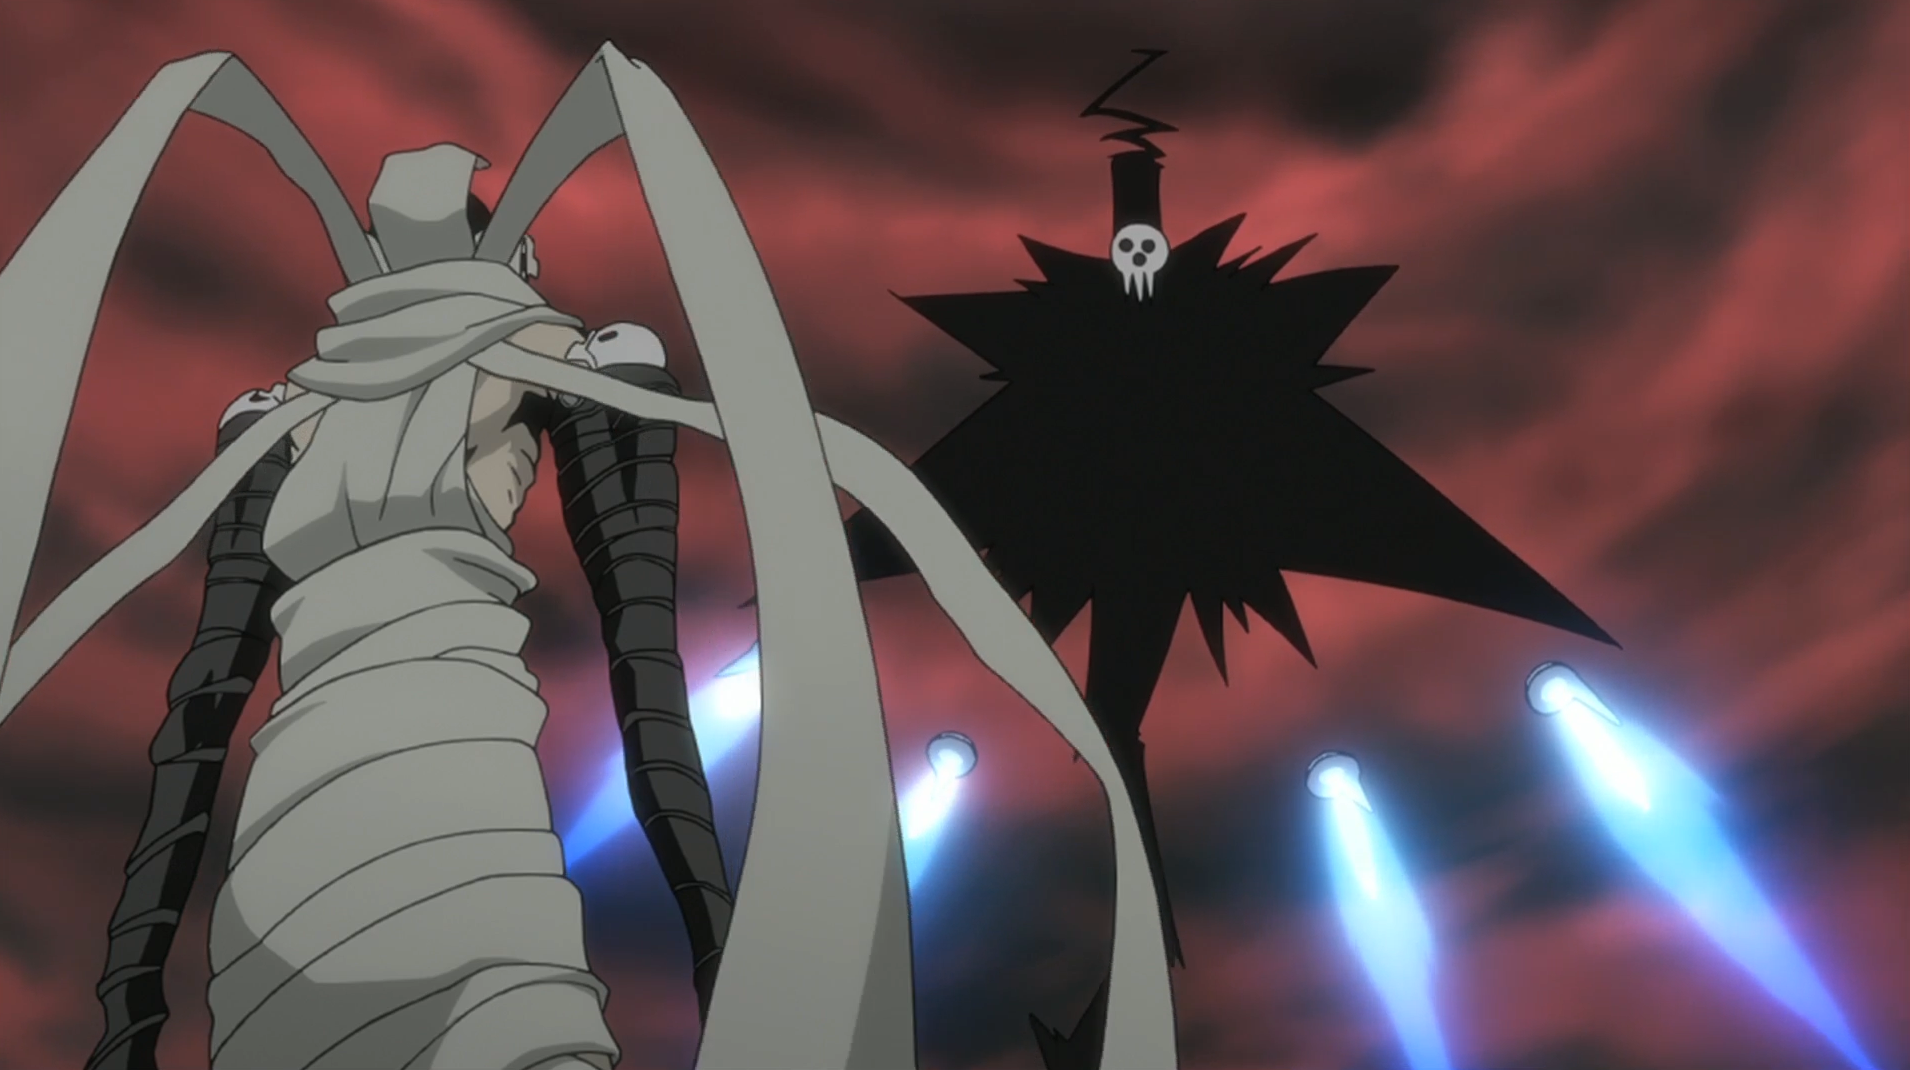 10 Hot Fights from Soul Eater 